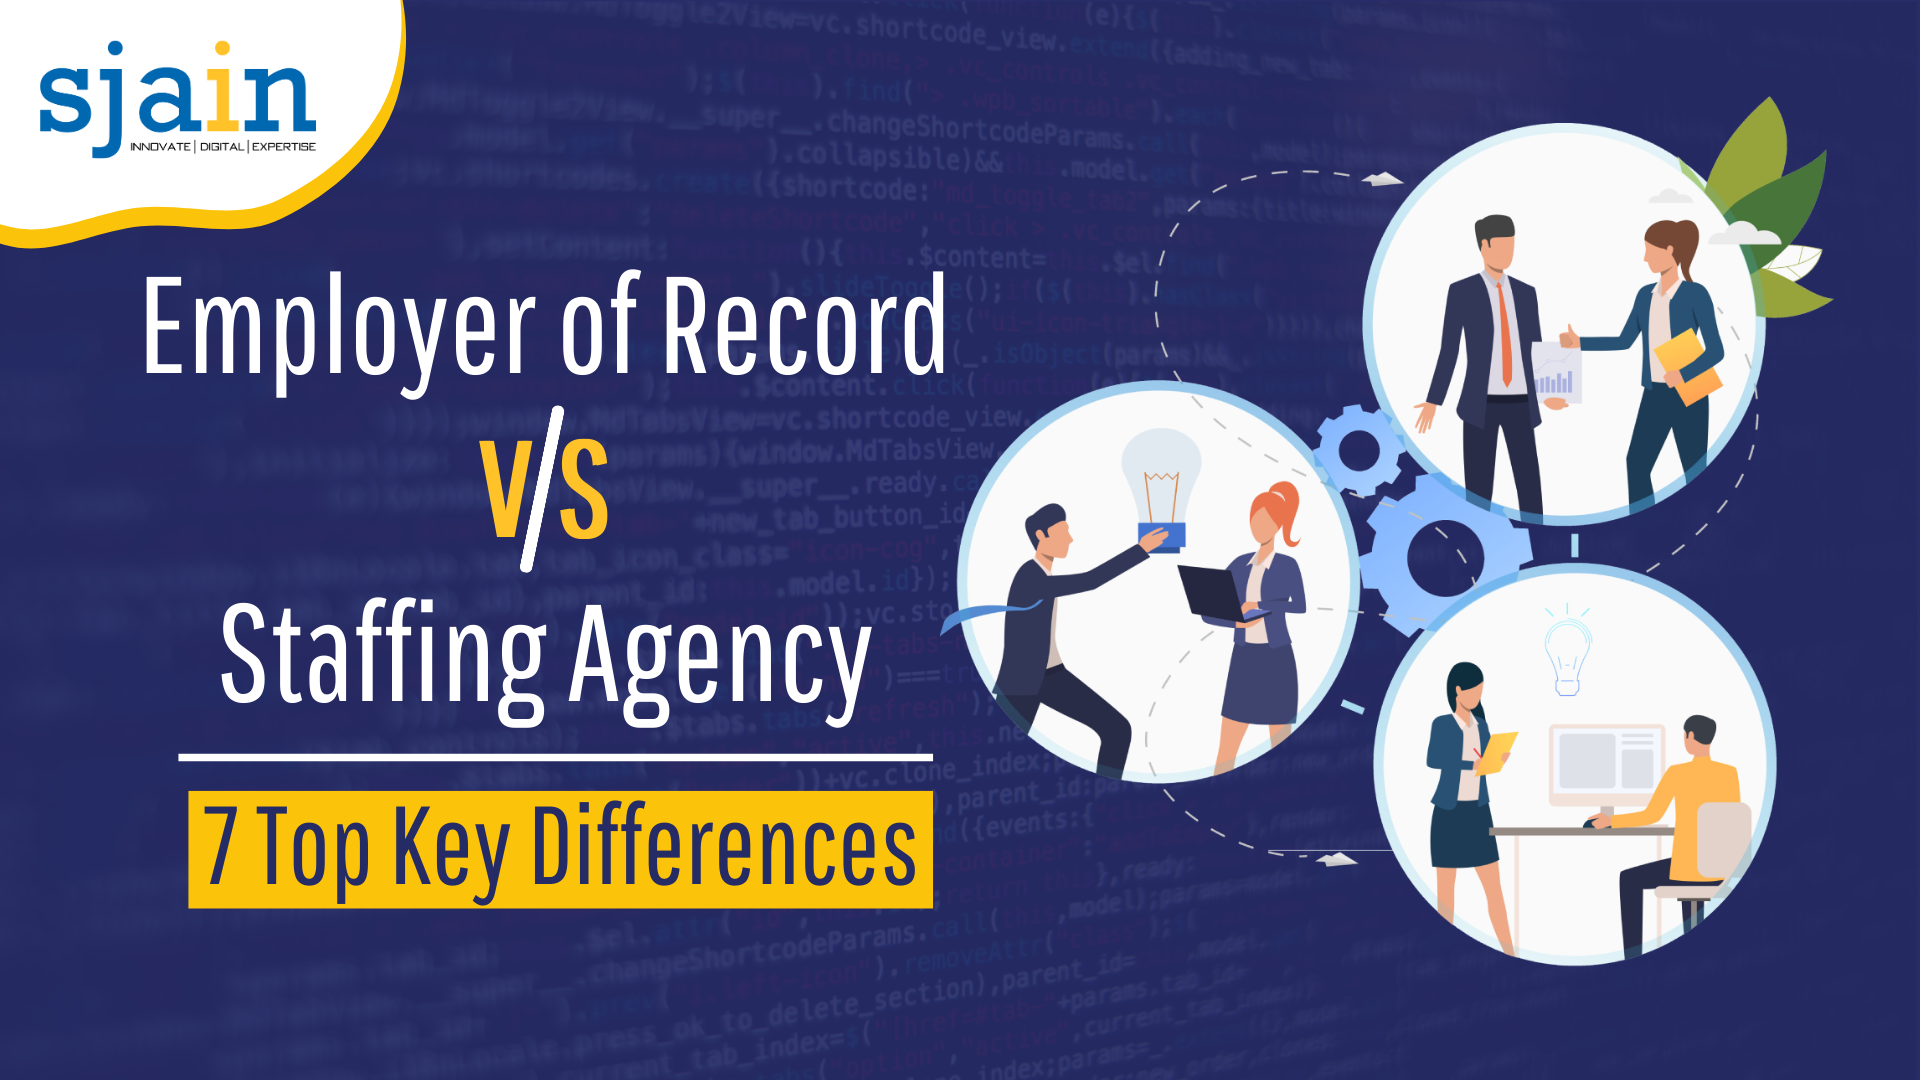 Employer of Record vs Staffing Agency – 7 Top Key Differences